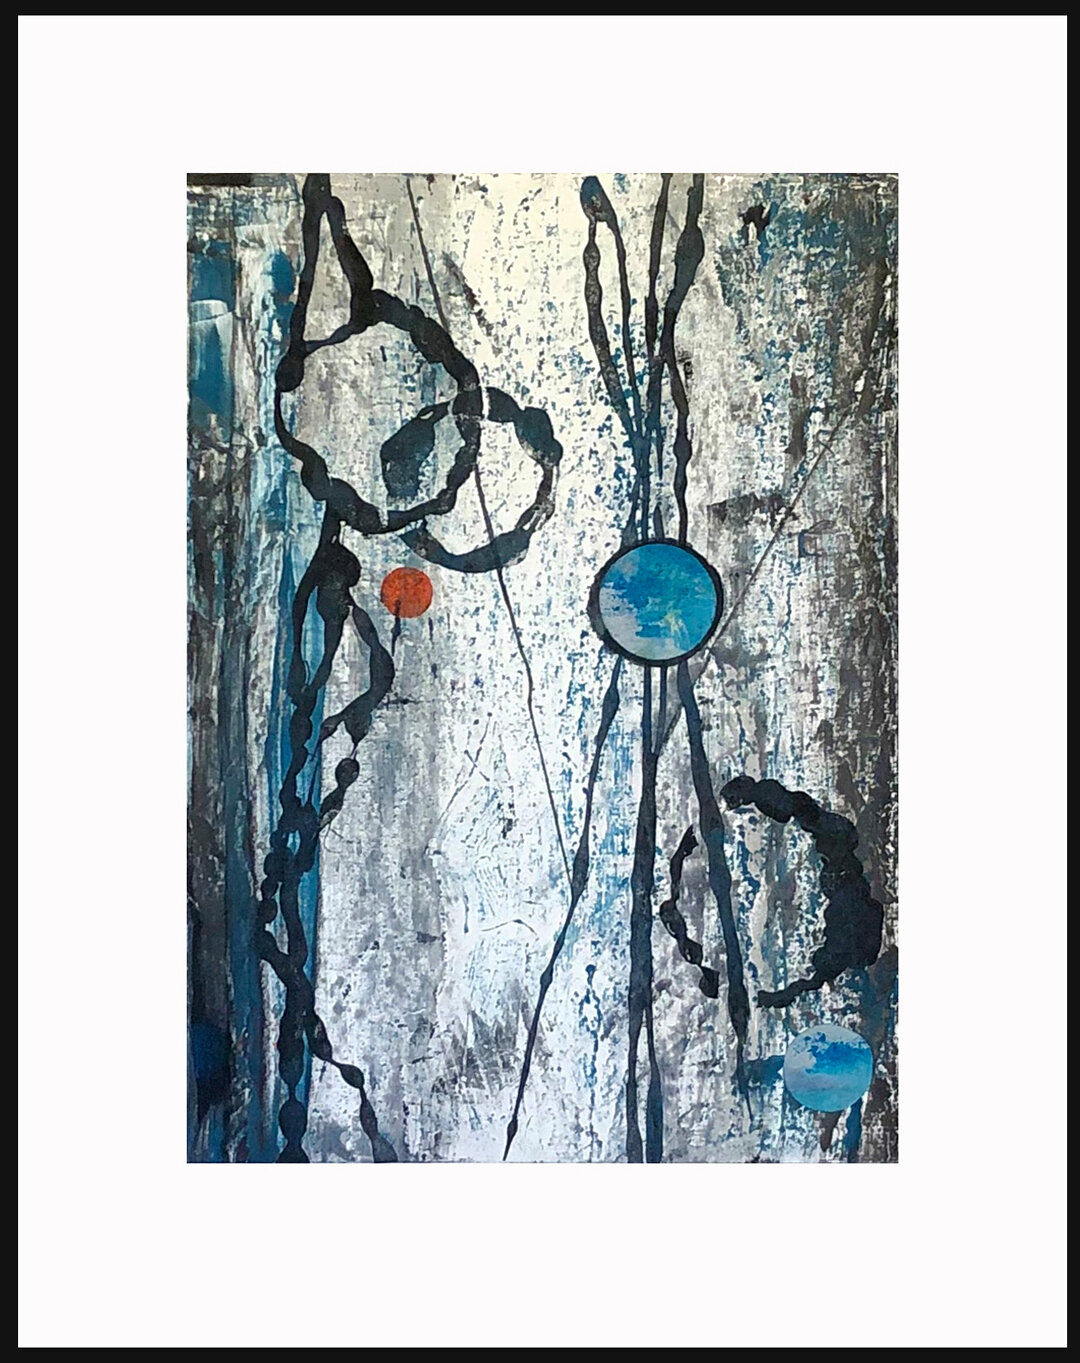    Conundrum   is a mixed media monoprint measuring 20 x 16 inches. Floated and framed. 1/1   $390  